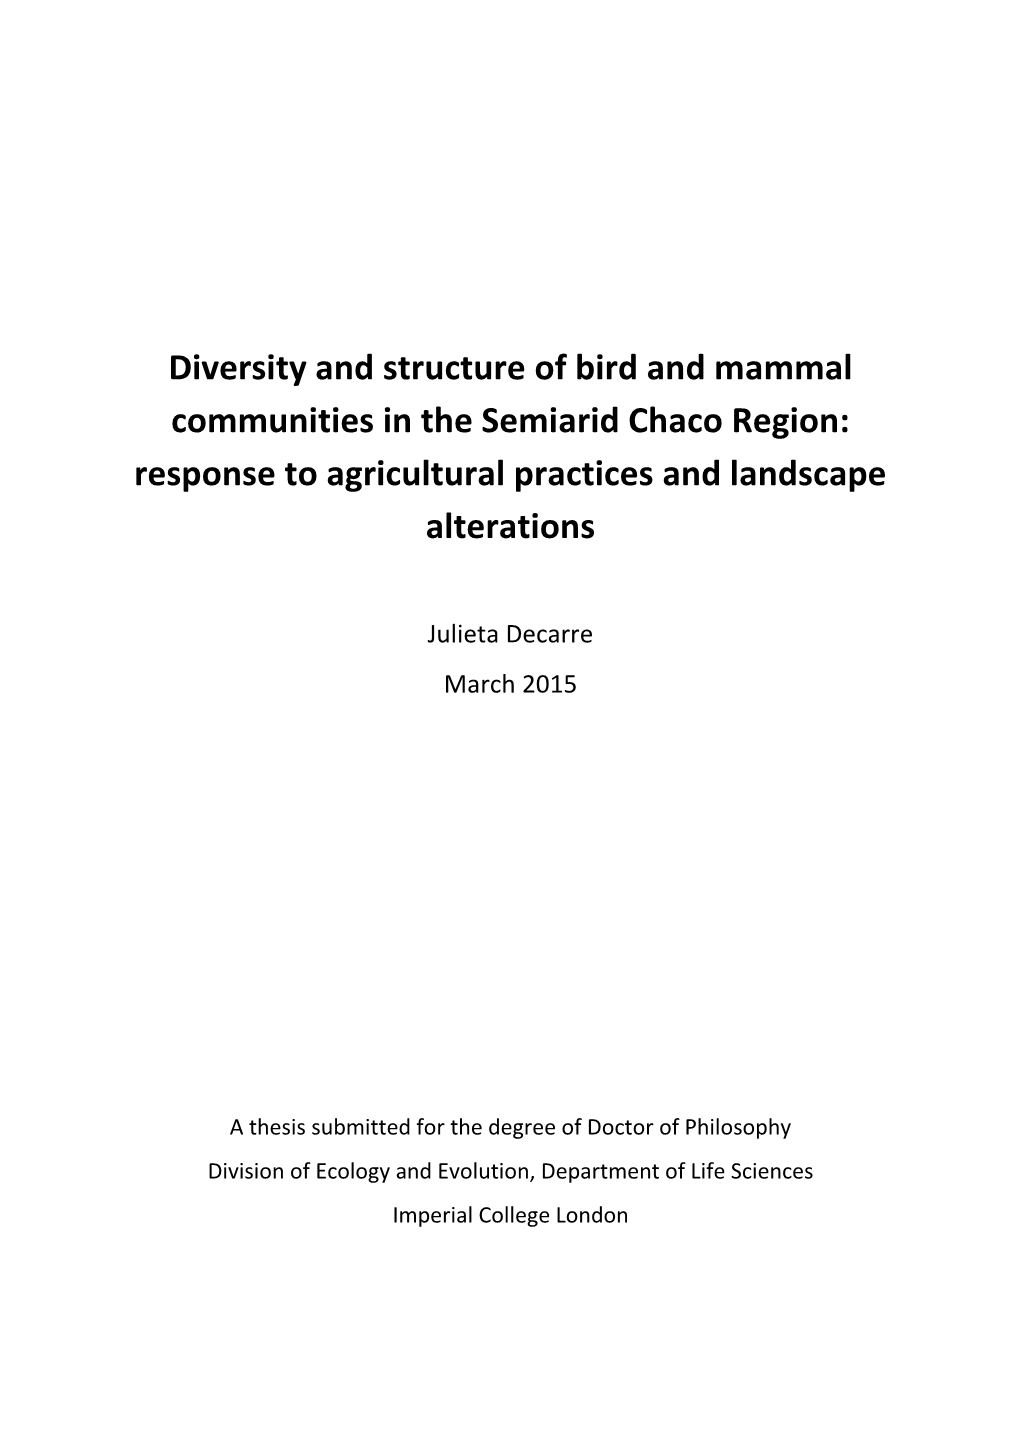 Diversity and Structure of Bird and Mammal Communities in the Semiarid Chaco Region: Response to Agricultural Practices and Landscape Alterations